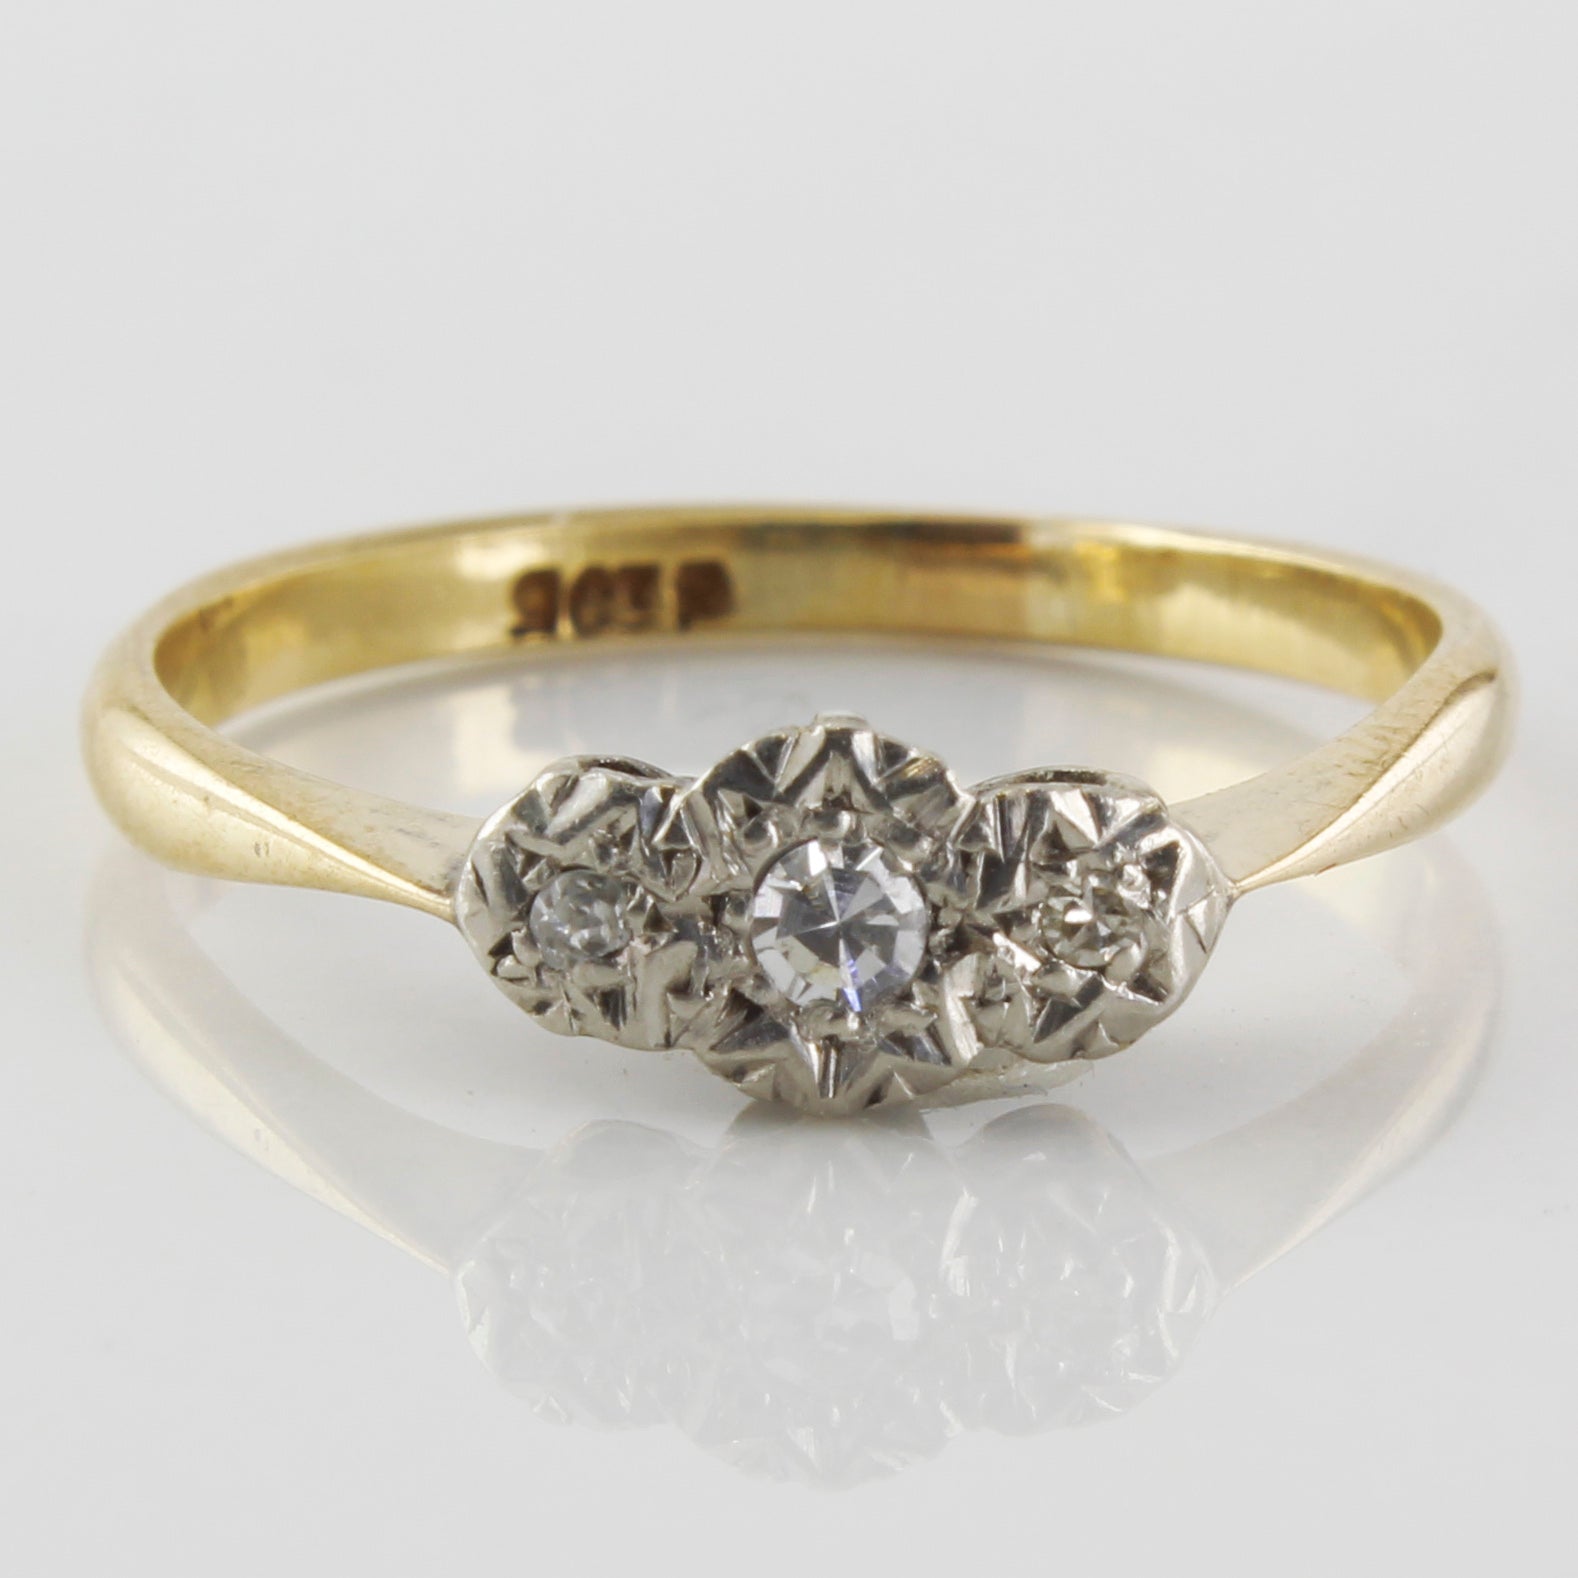 Three stone set diamond ring,  vintage rings for sale in Canada